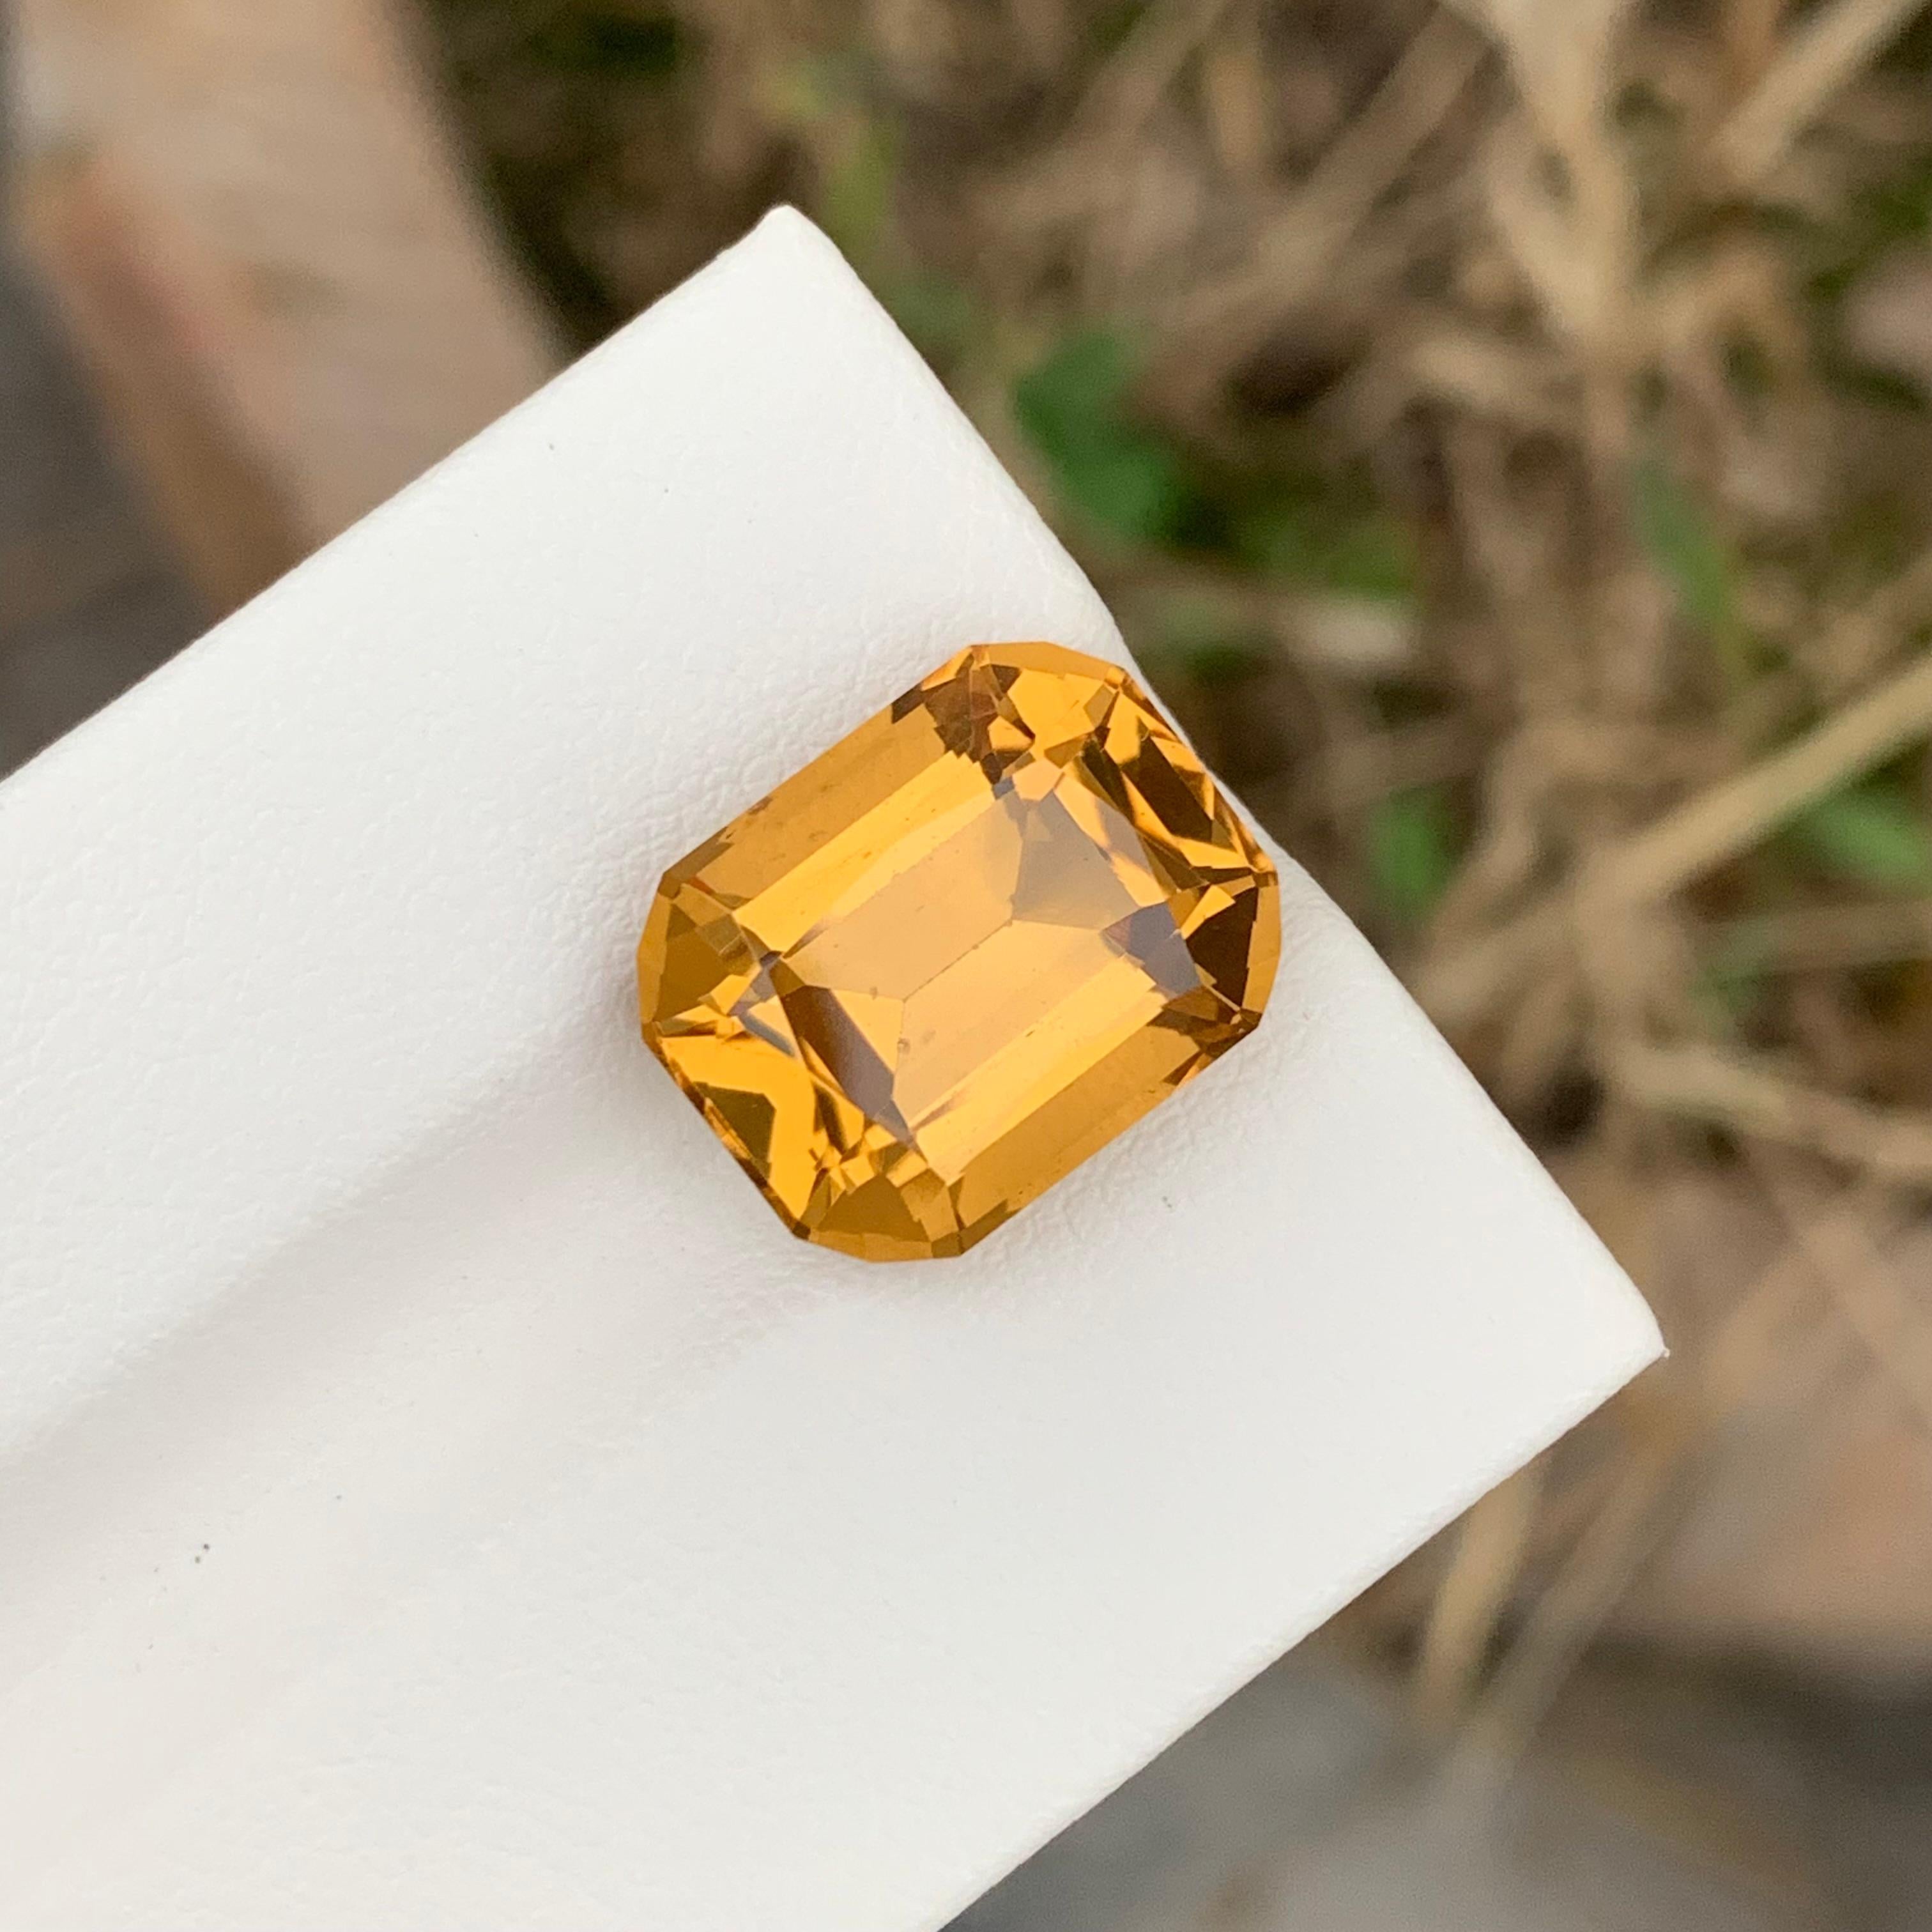 Loose Citrine
Weight: 8.65 Carats
Dimension: 13.9 x 10.9 x 8.4 Mm
Origin: Brazil
Colour: Honey Brown
Treatment: Non
Certficate: On Demand
Shape: Cushion 


Citrine, a radiant and versatile gemstone, enchants with its warm, golden hues and remarkable